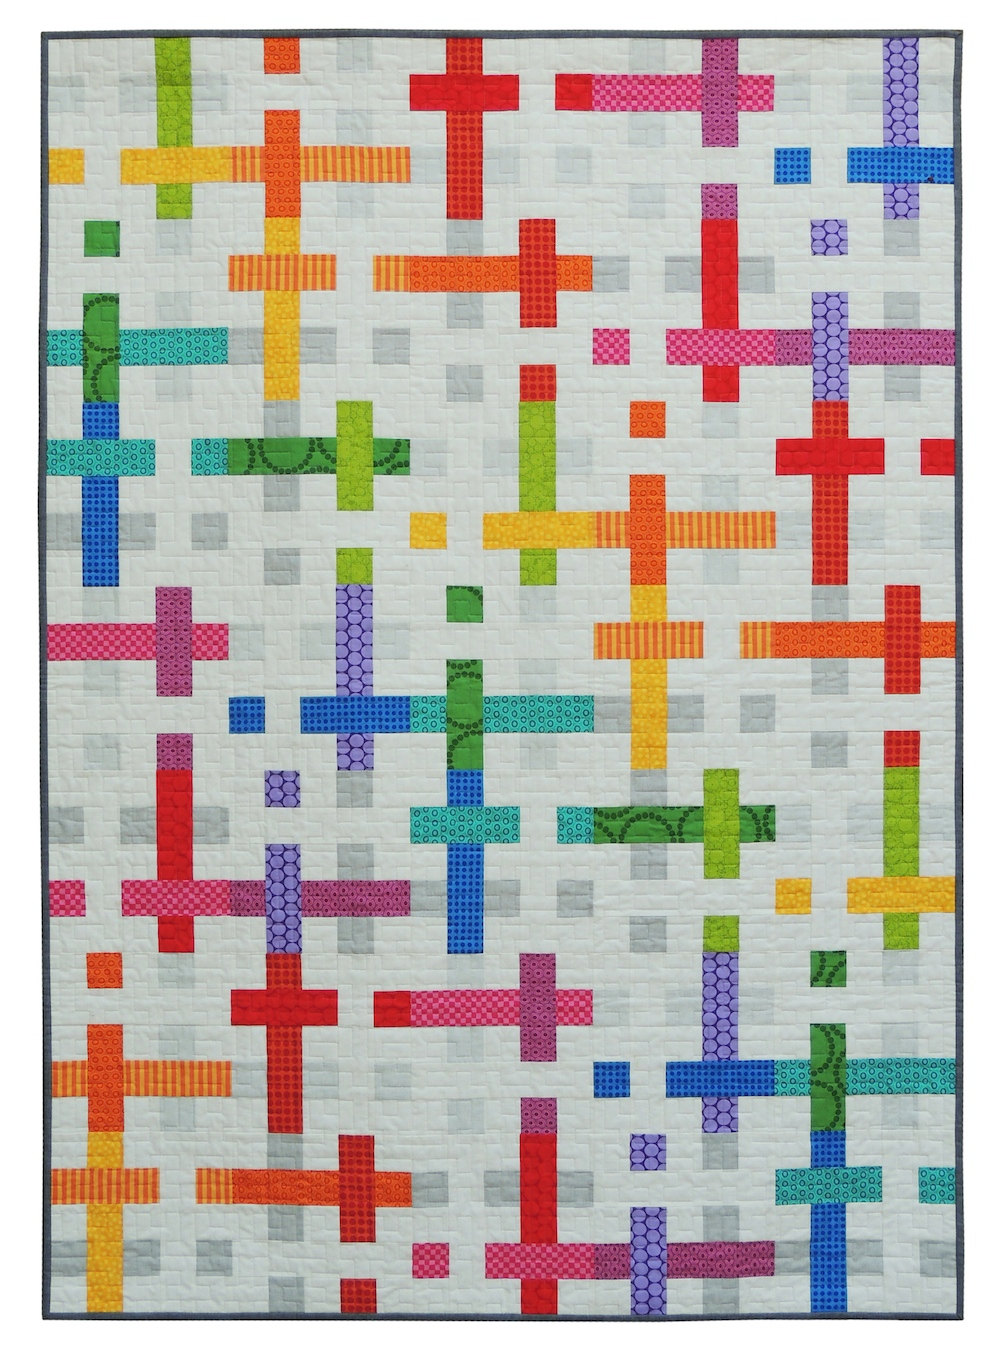 10+ Fabulous Rainbow Quilt Patterns: These rainbow quilt patterns will give you all sorts of fabulous feelings! I just love a fun rainbow don't you? Click through for the full list of rainbow quilt patterns to sew. | www.sewwhatalicia.com